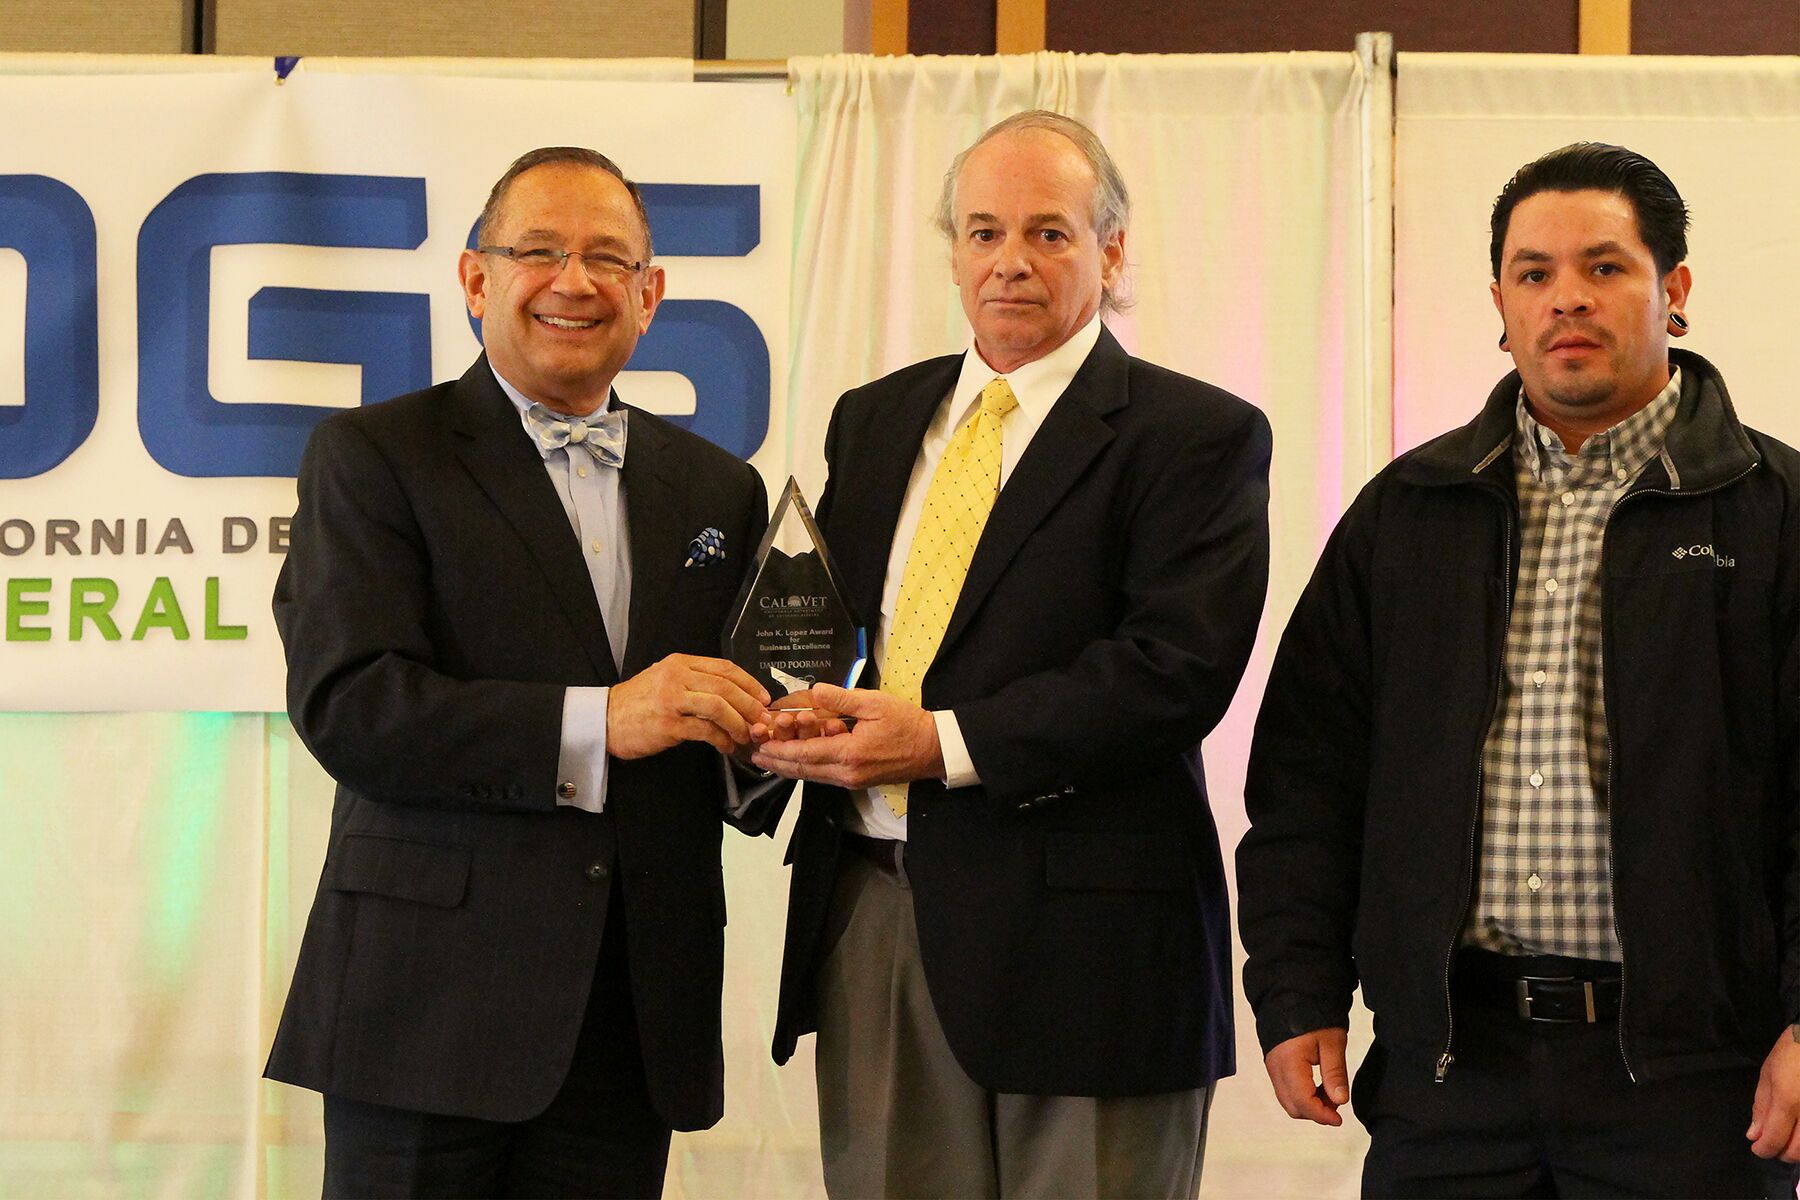 Steve DiPressi and Eddie Barajas from IECLT, Inc. accept the John K. Lopez award for Business excellence